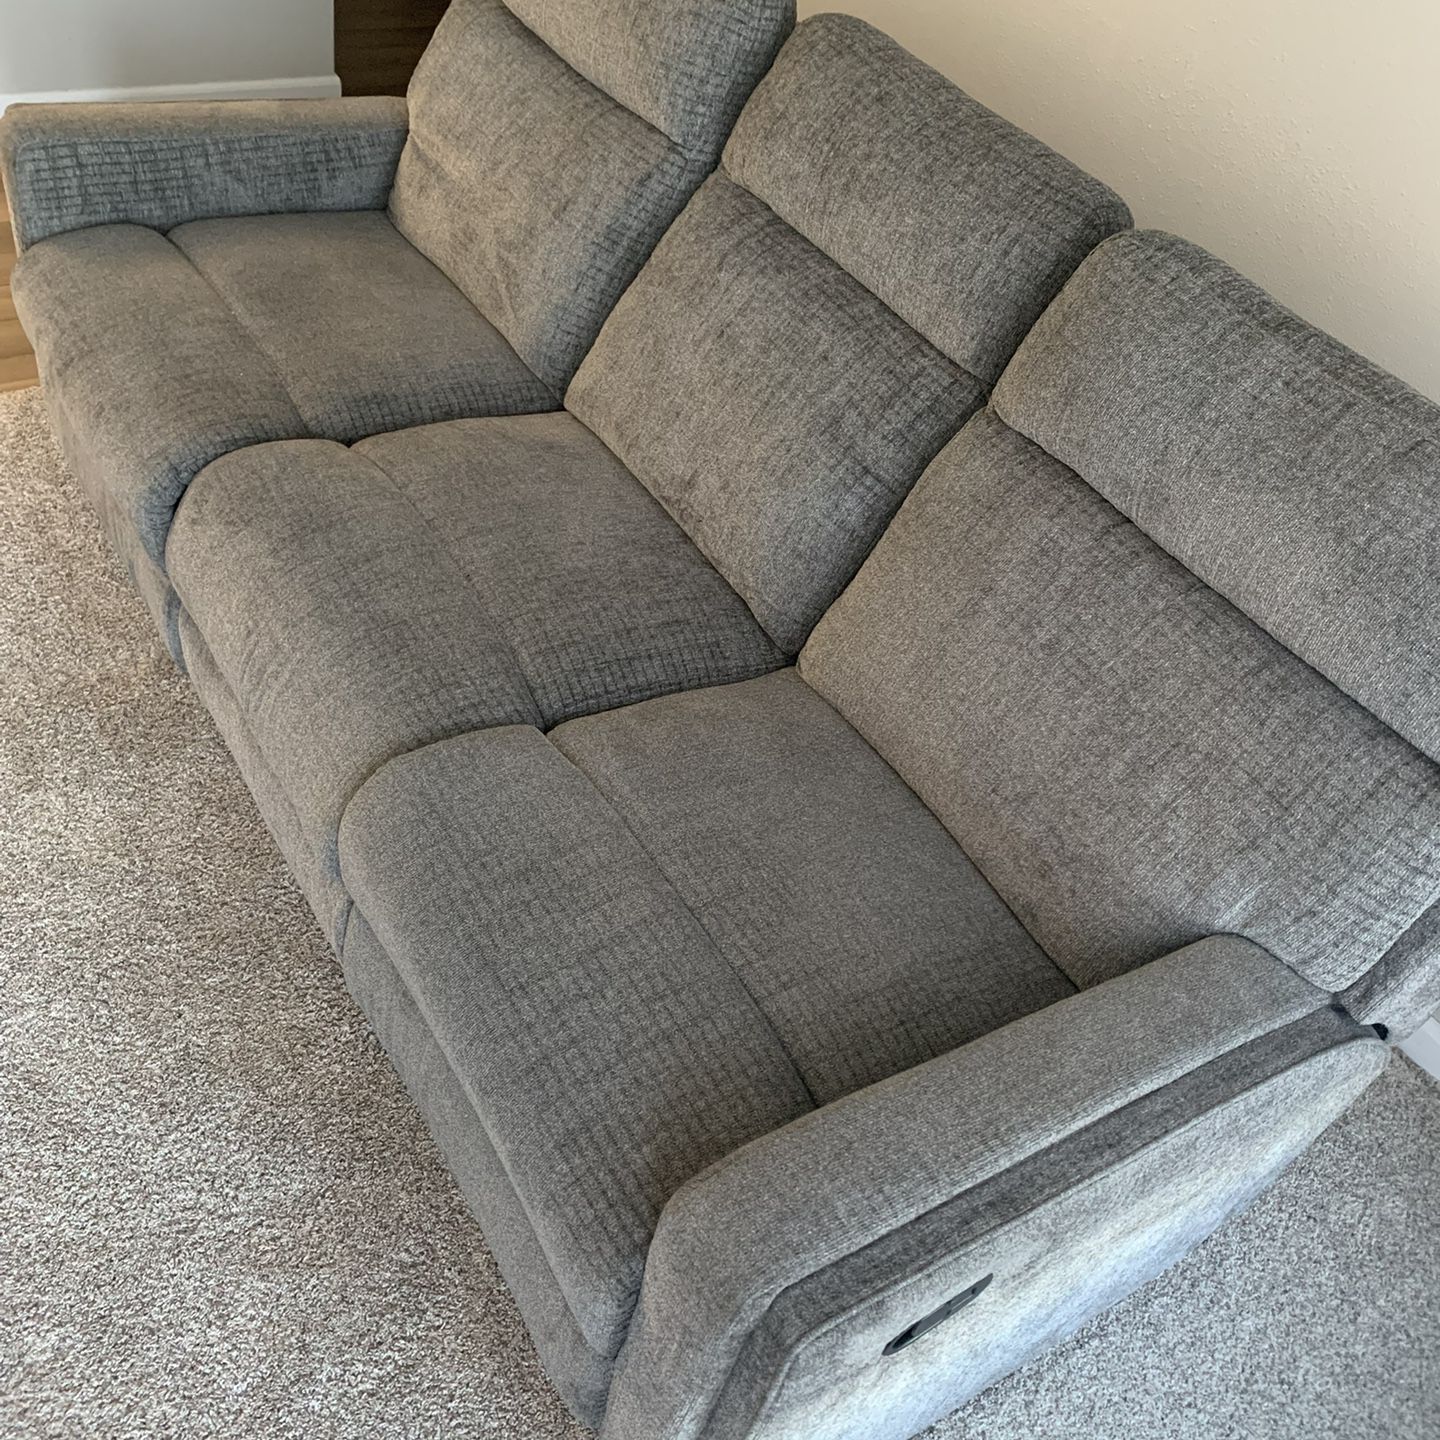 Recliner Couch - Lightly Used